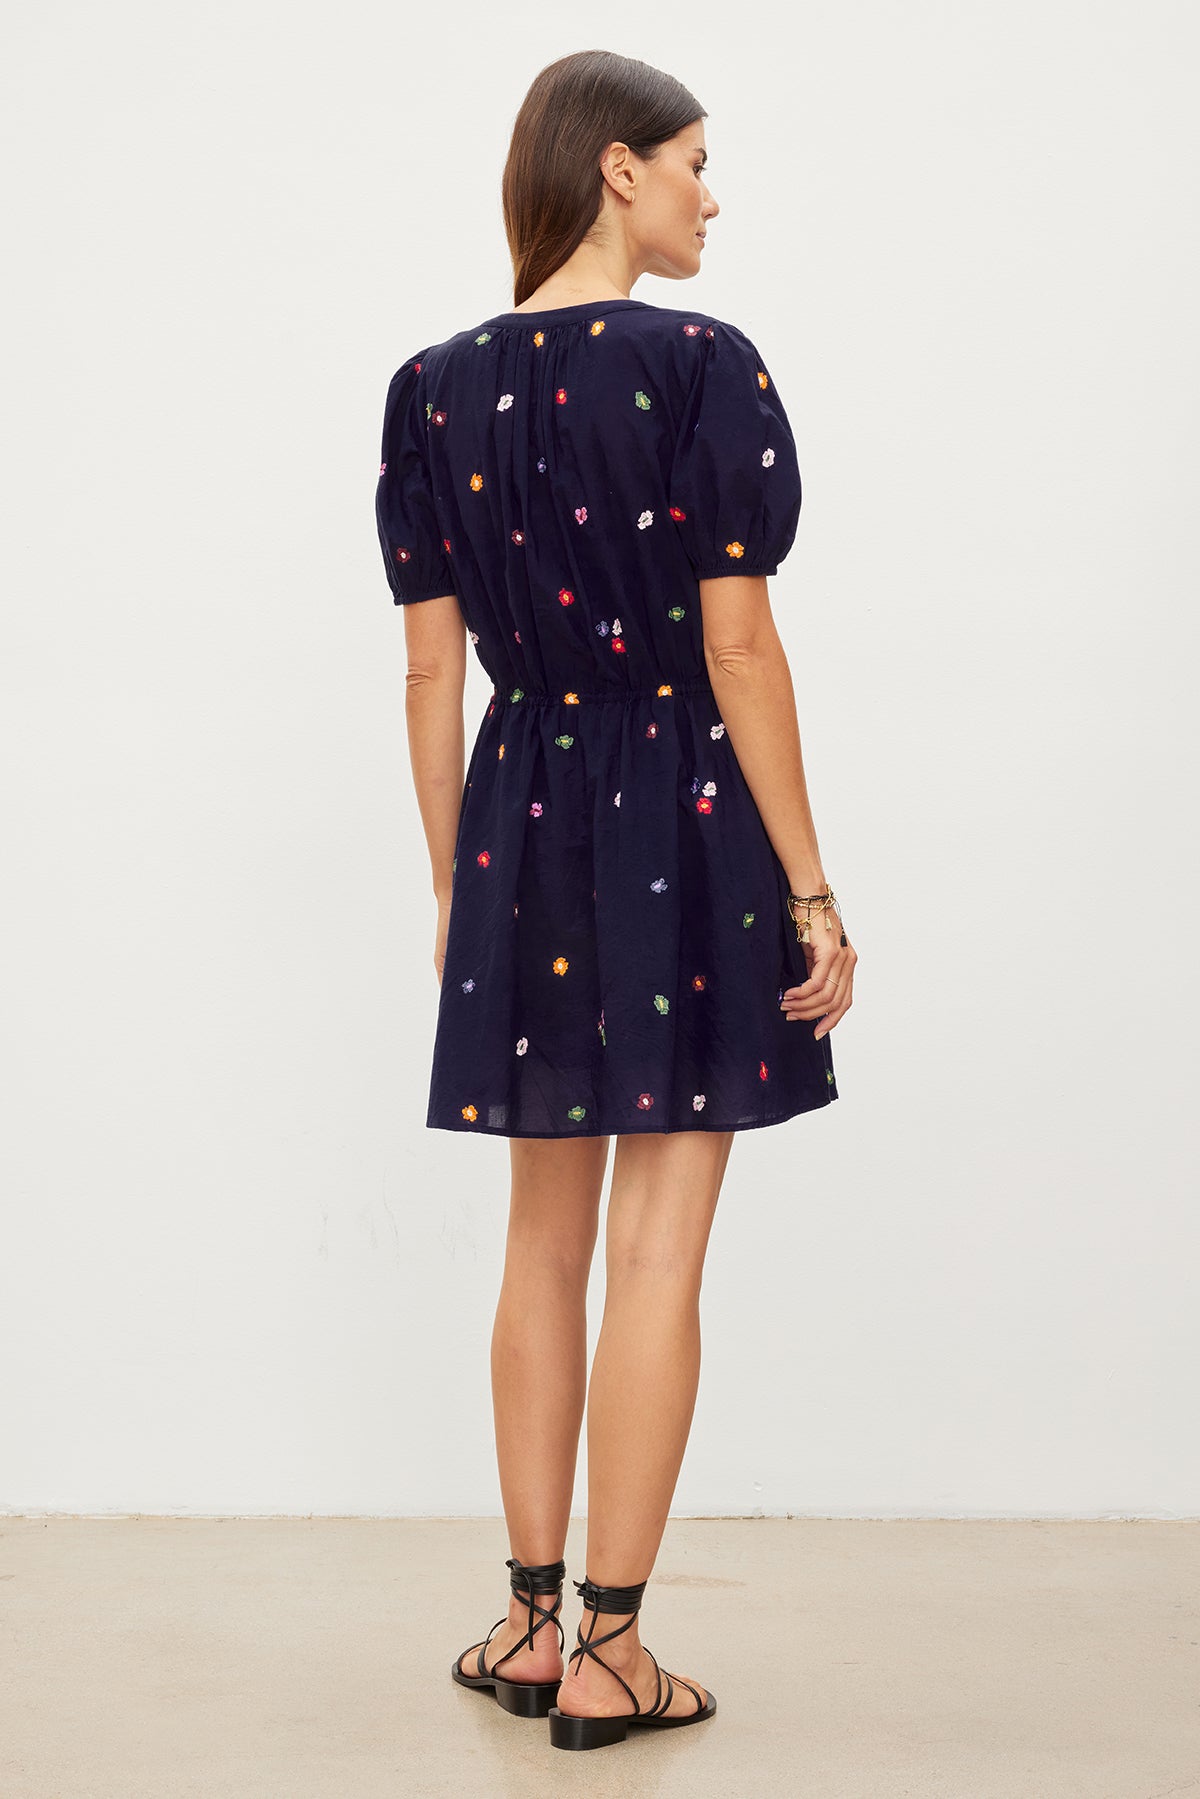   Woman from behind wearing a navy Velvet by Graham & Spencer dress with floral embroidery, tied at the drawstring waist, standing in a neutral setting. 